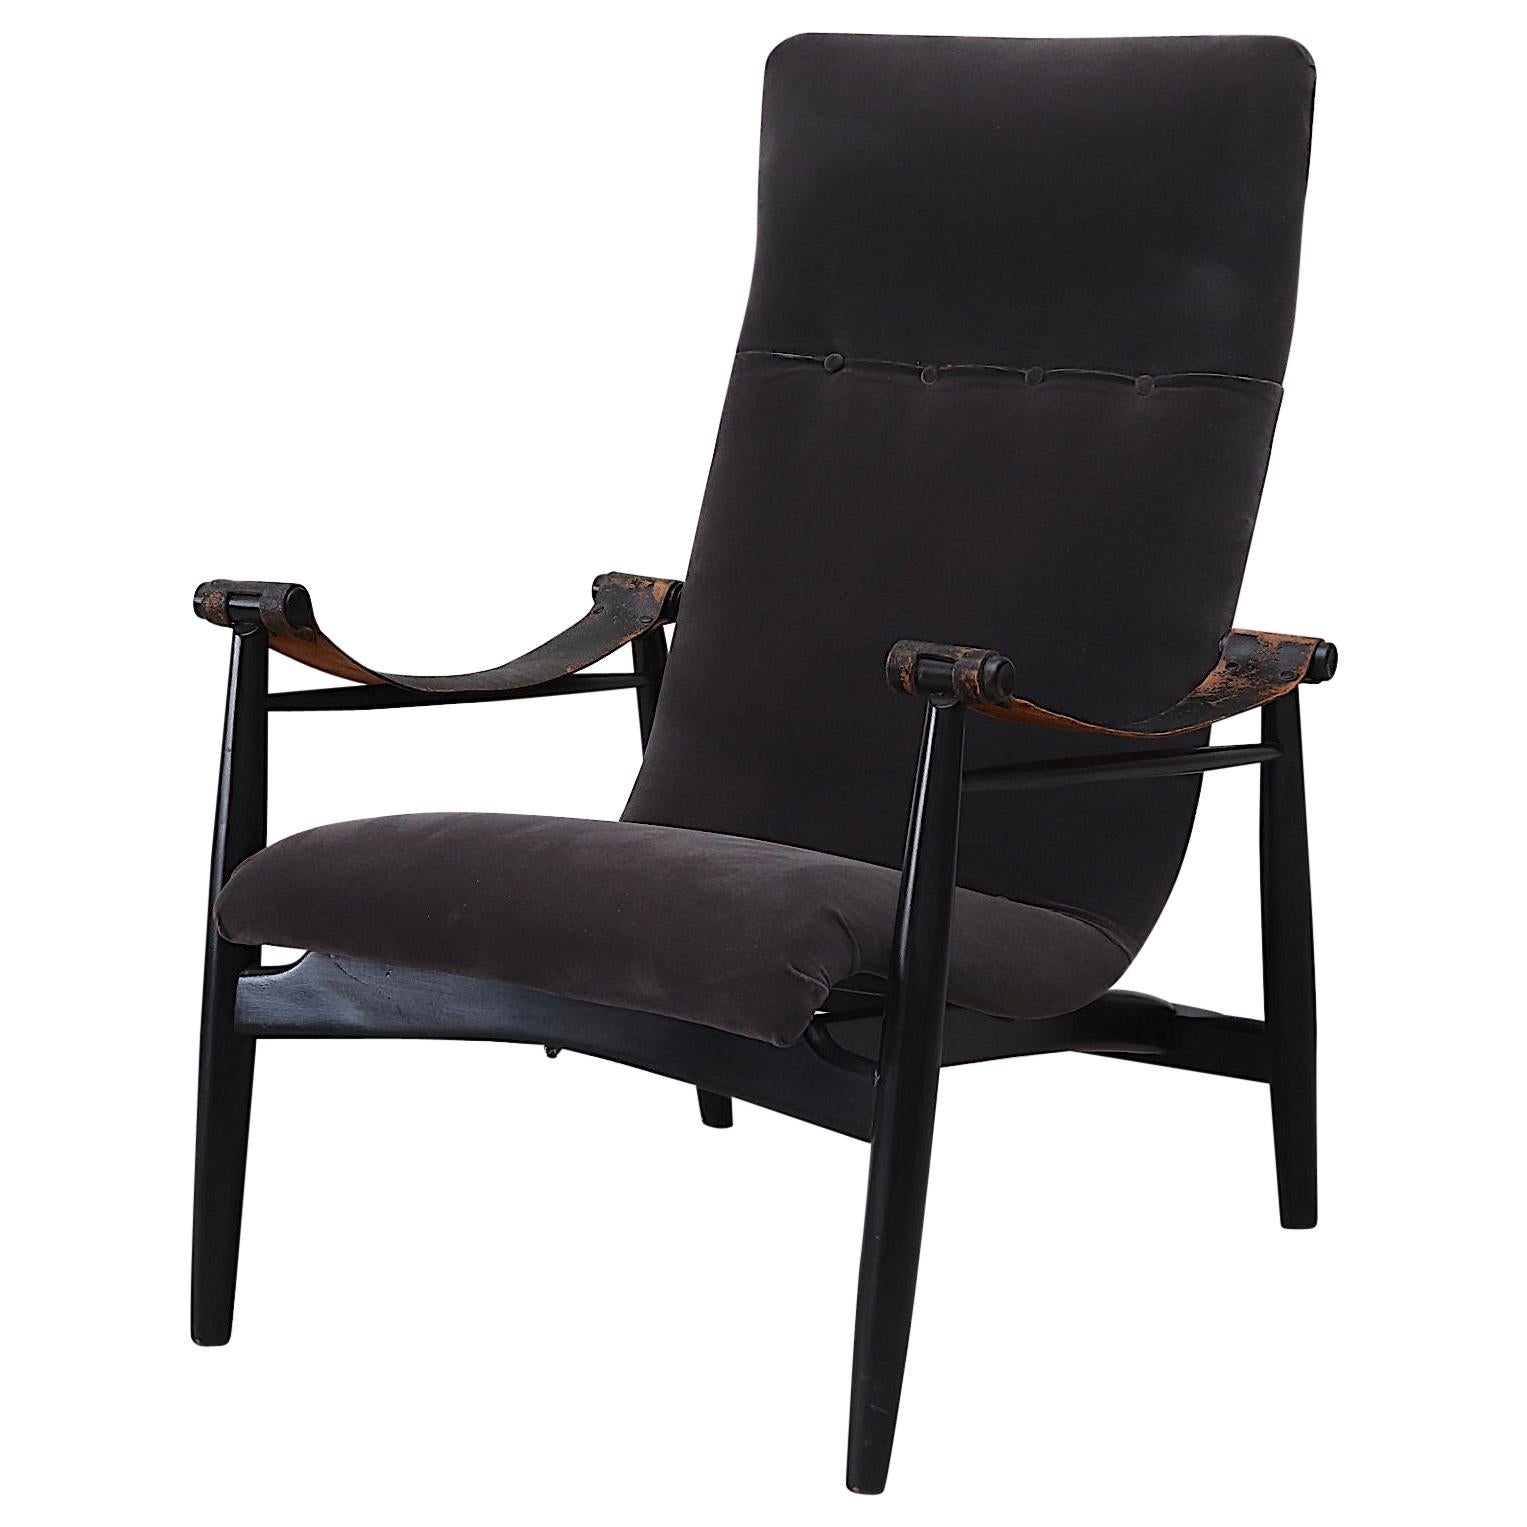 P.J. Muntendam Midcentury Lounge Chair with Leather Arms